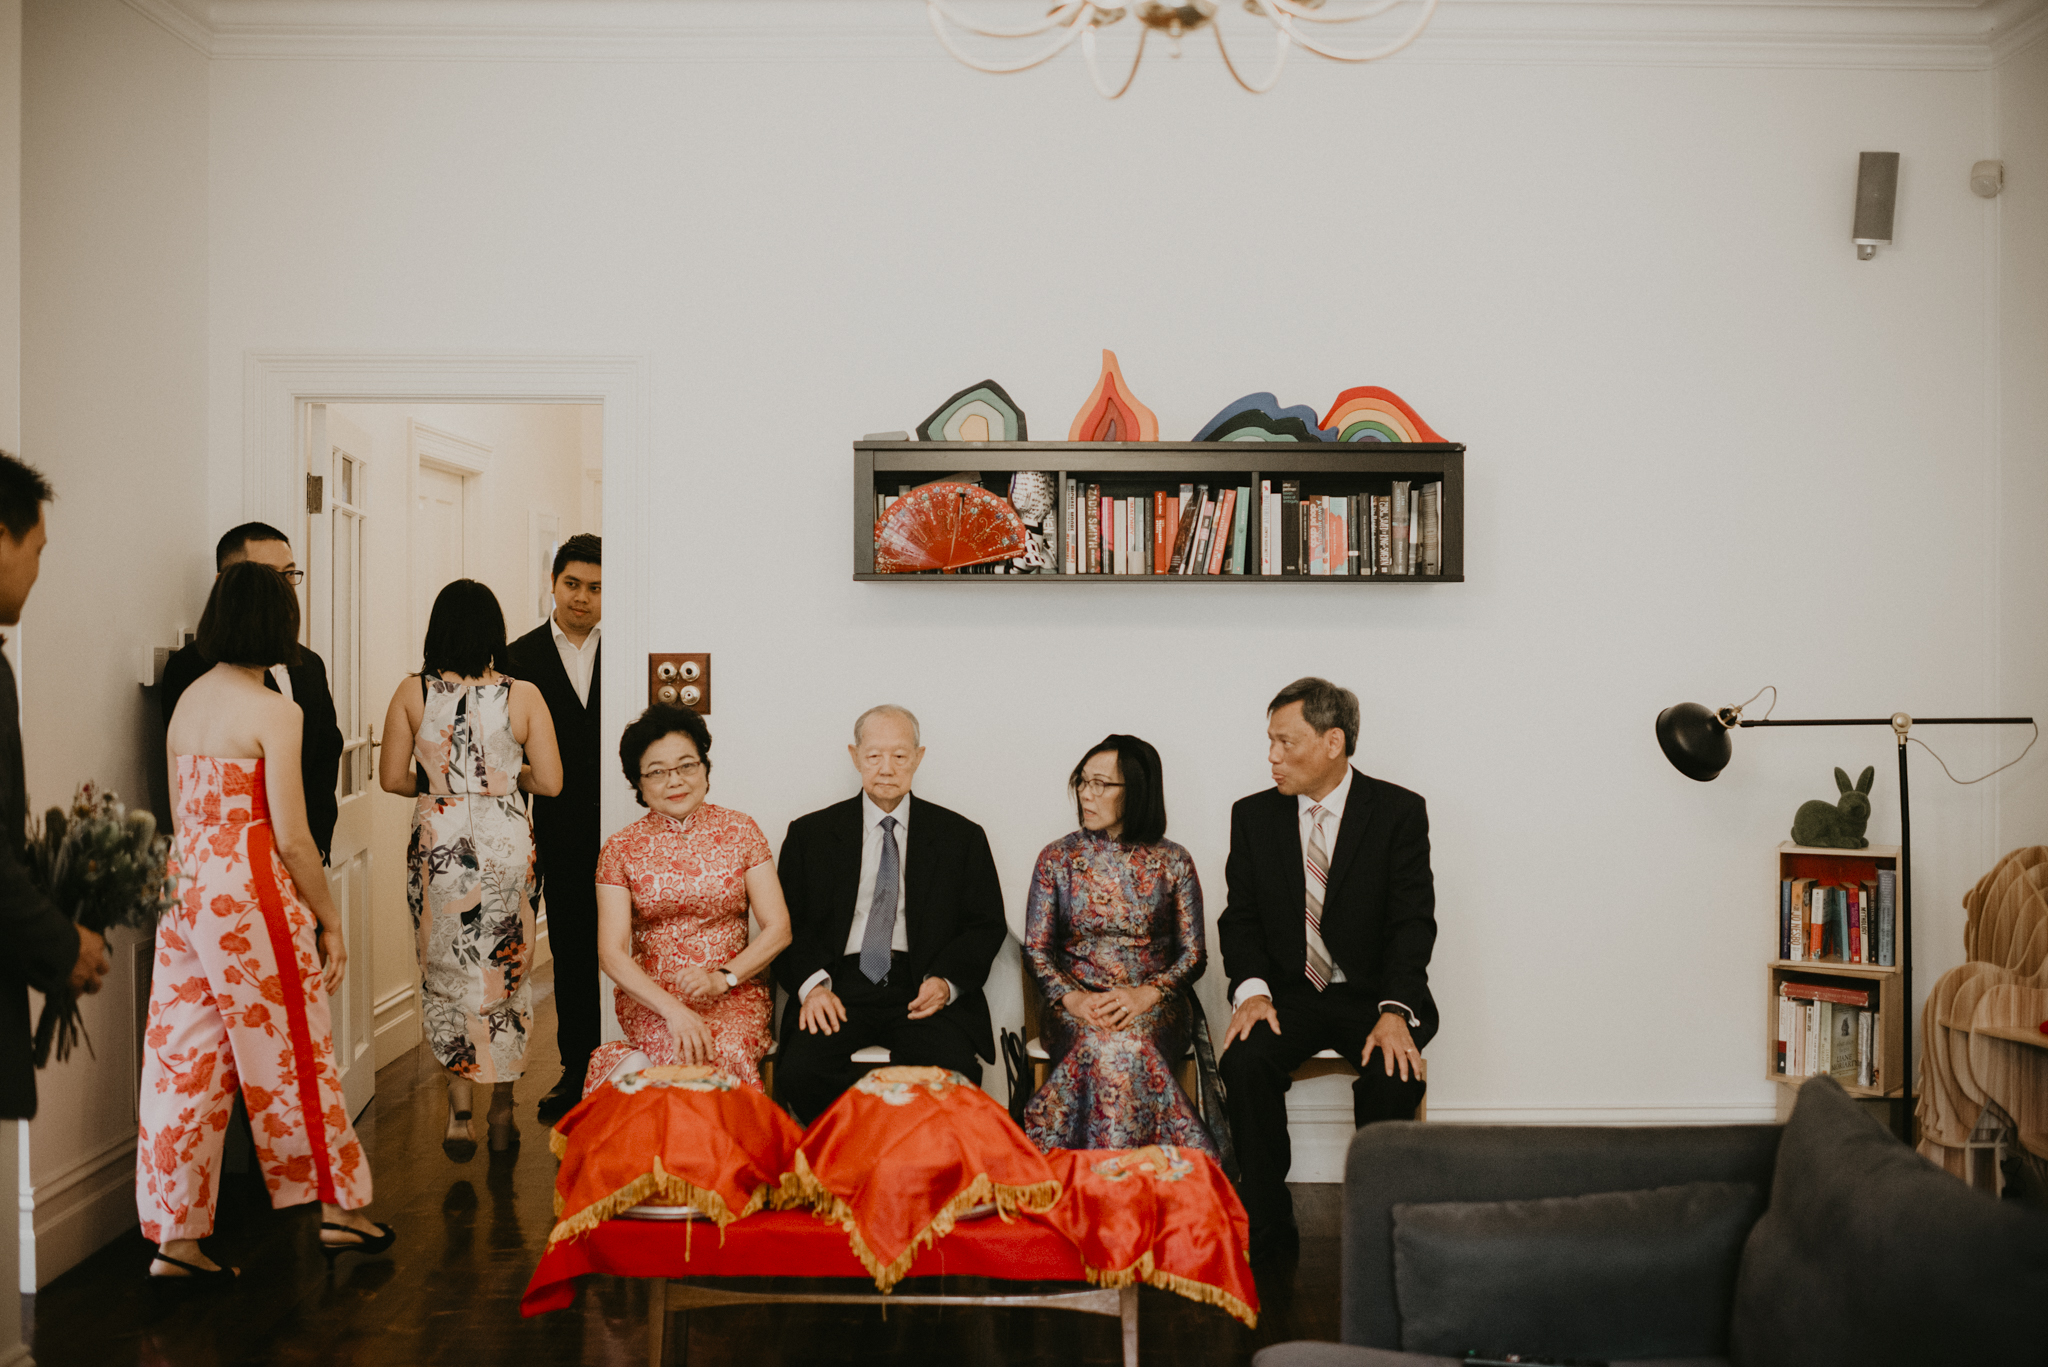 agnes-duy-15th-december-2018-chinese-vietnamese-wedding-tea-ceremony-yarraville-home-house-documentary-candid-photographer-sarah-matler-photography-19